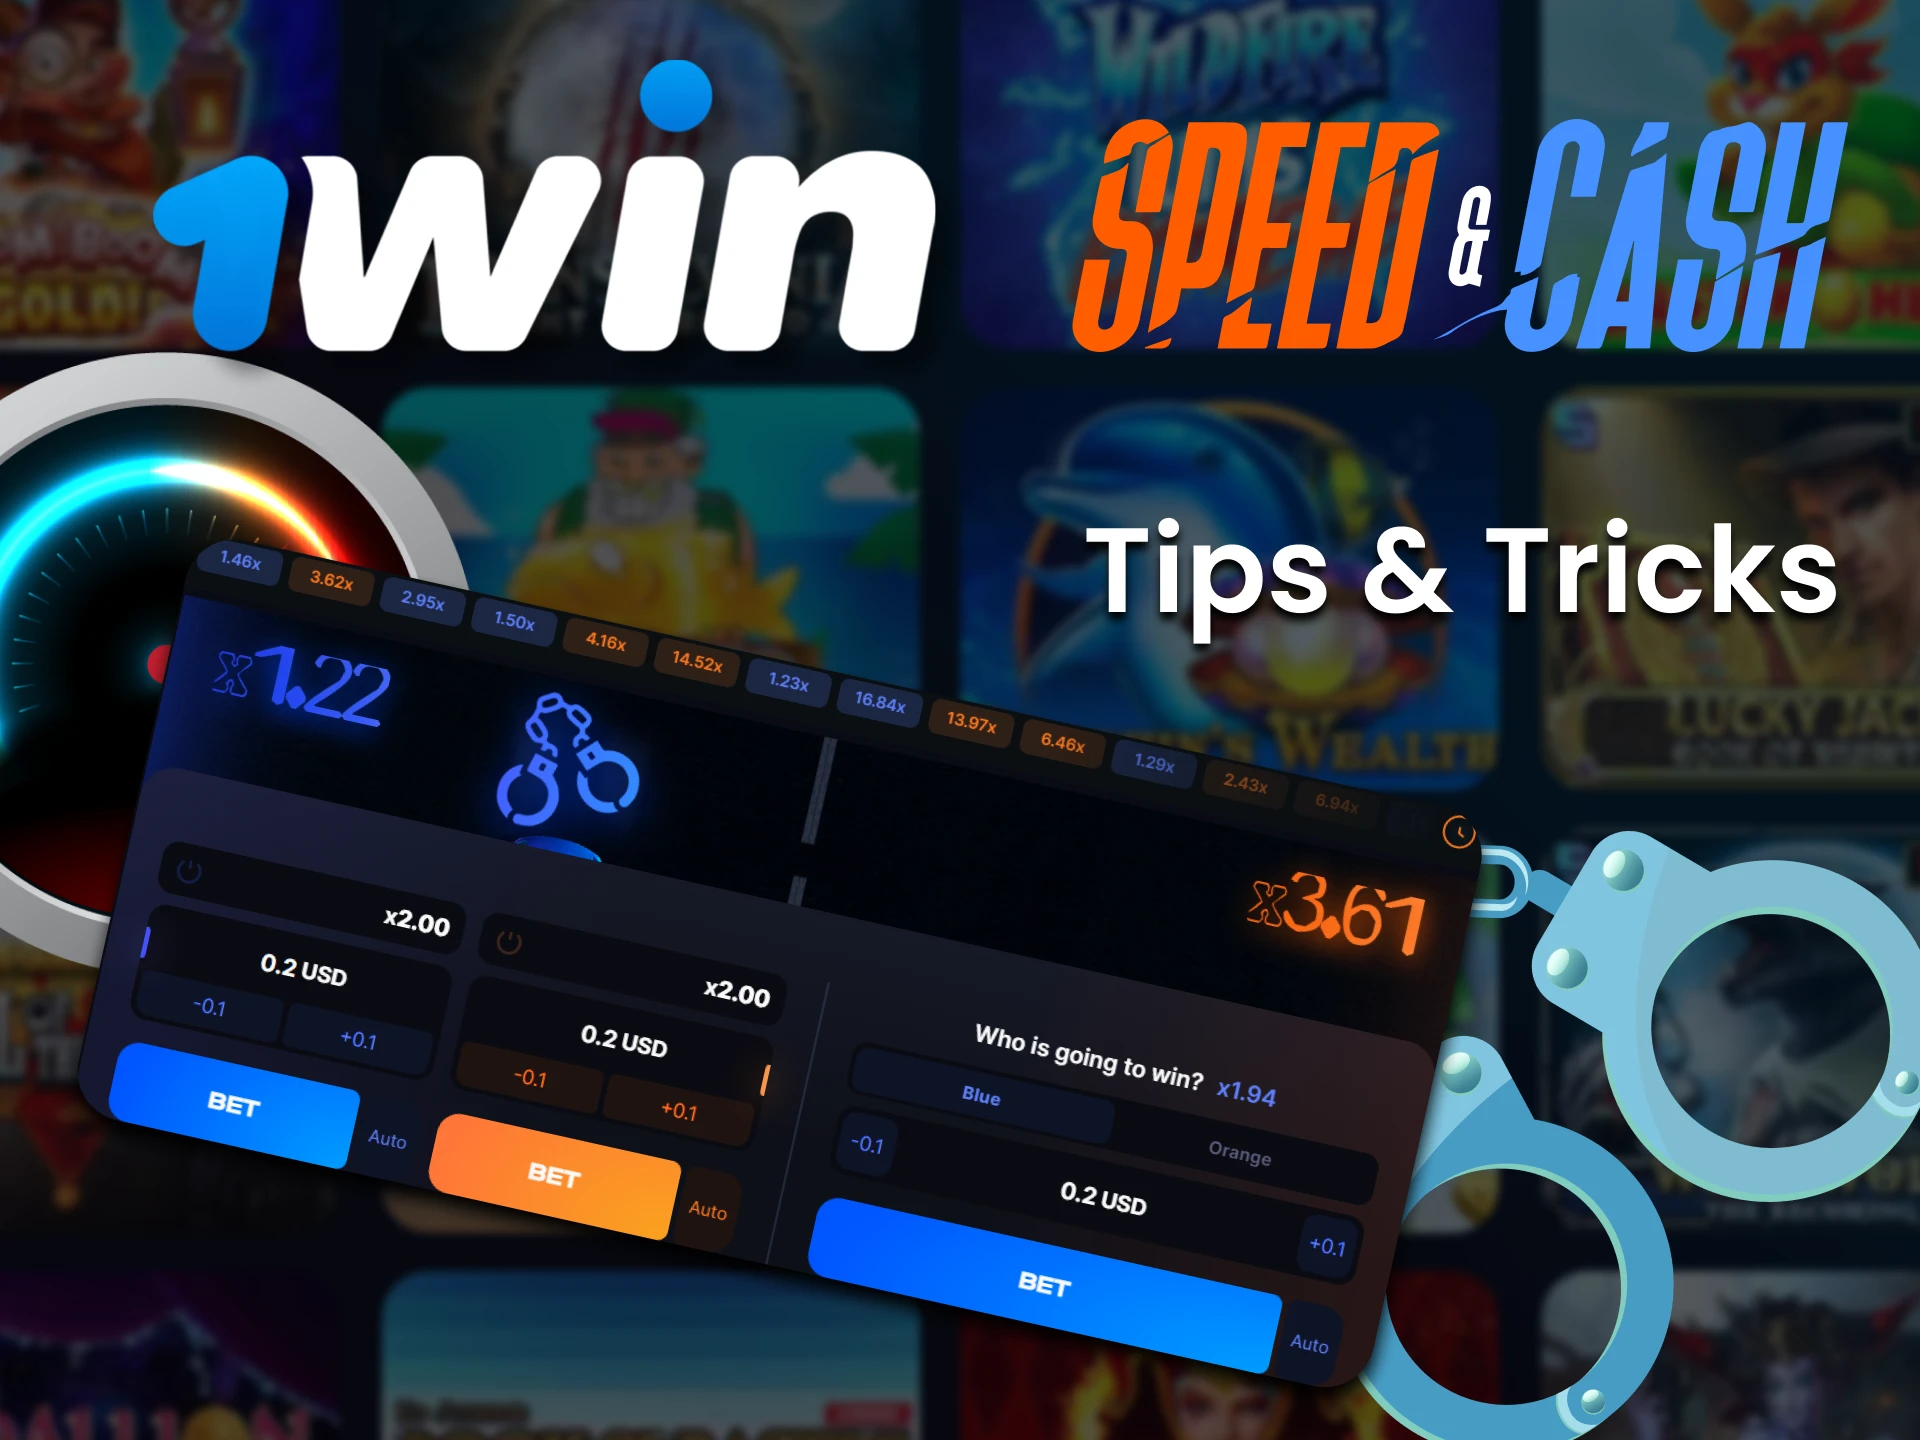 Learn tips and tricks for playing Speed & Cash at 1Win.